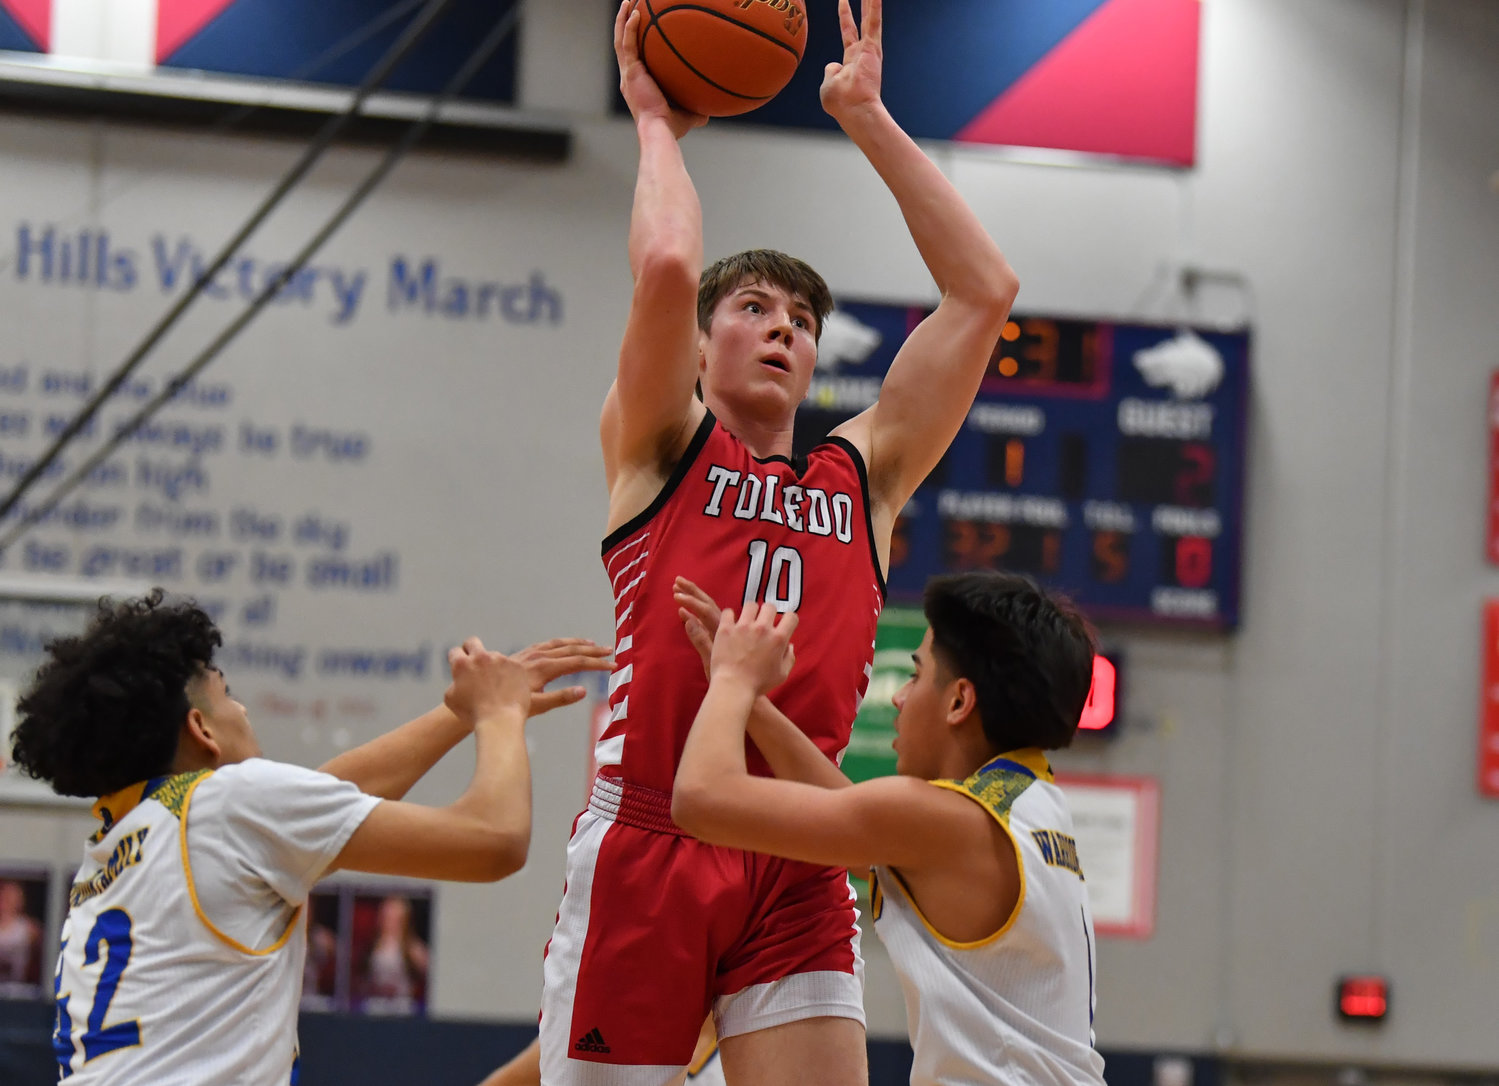 Toledo’s Carson Olmstead shoots over two Chief Leschi players in the district playoffs at Black Hills High School on Feb. 11.